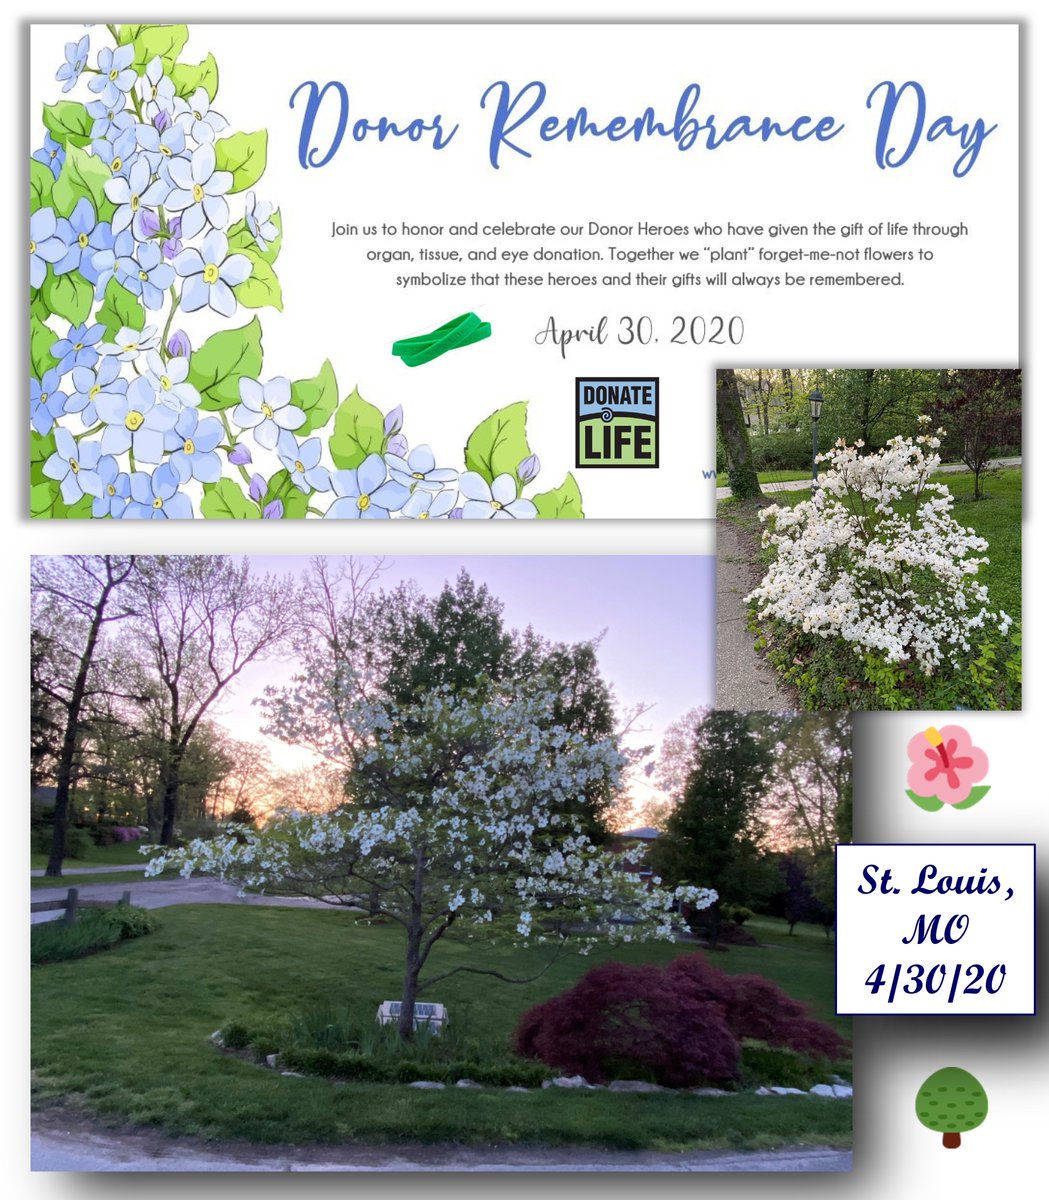 Honoring #DonorRemembranceDay 2020 in our #StLouis community. 🙏🏻Humbled by generosity of #OrganDonors & their families in sharing  #GiftOfLife w/ patients in need. Forget-me-not flowers🌼symbolize their ongoing legacy. @SLUHospital @midamtransplant @AOPOHQ @DonateLifeMO @UNOSNews